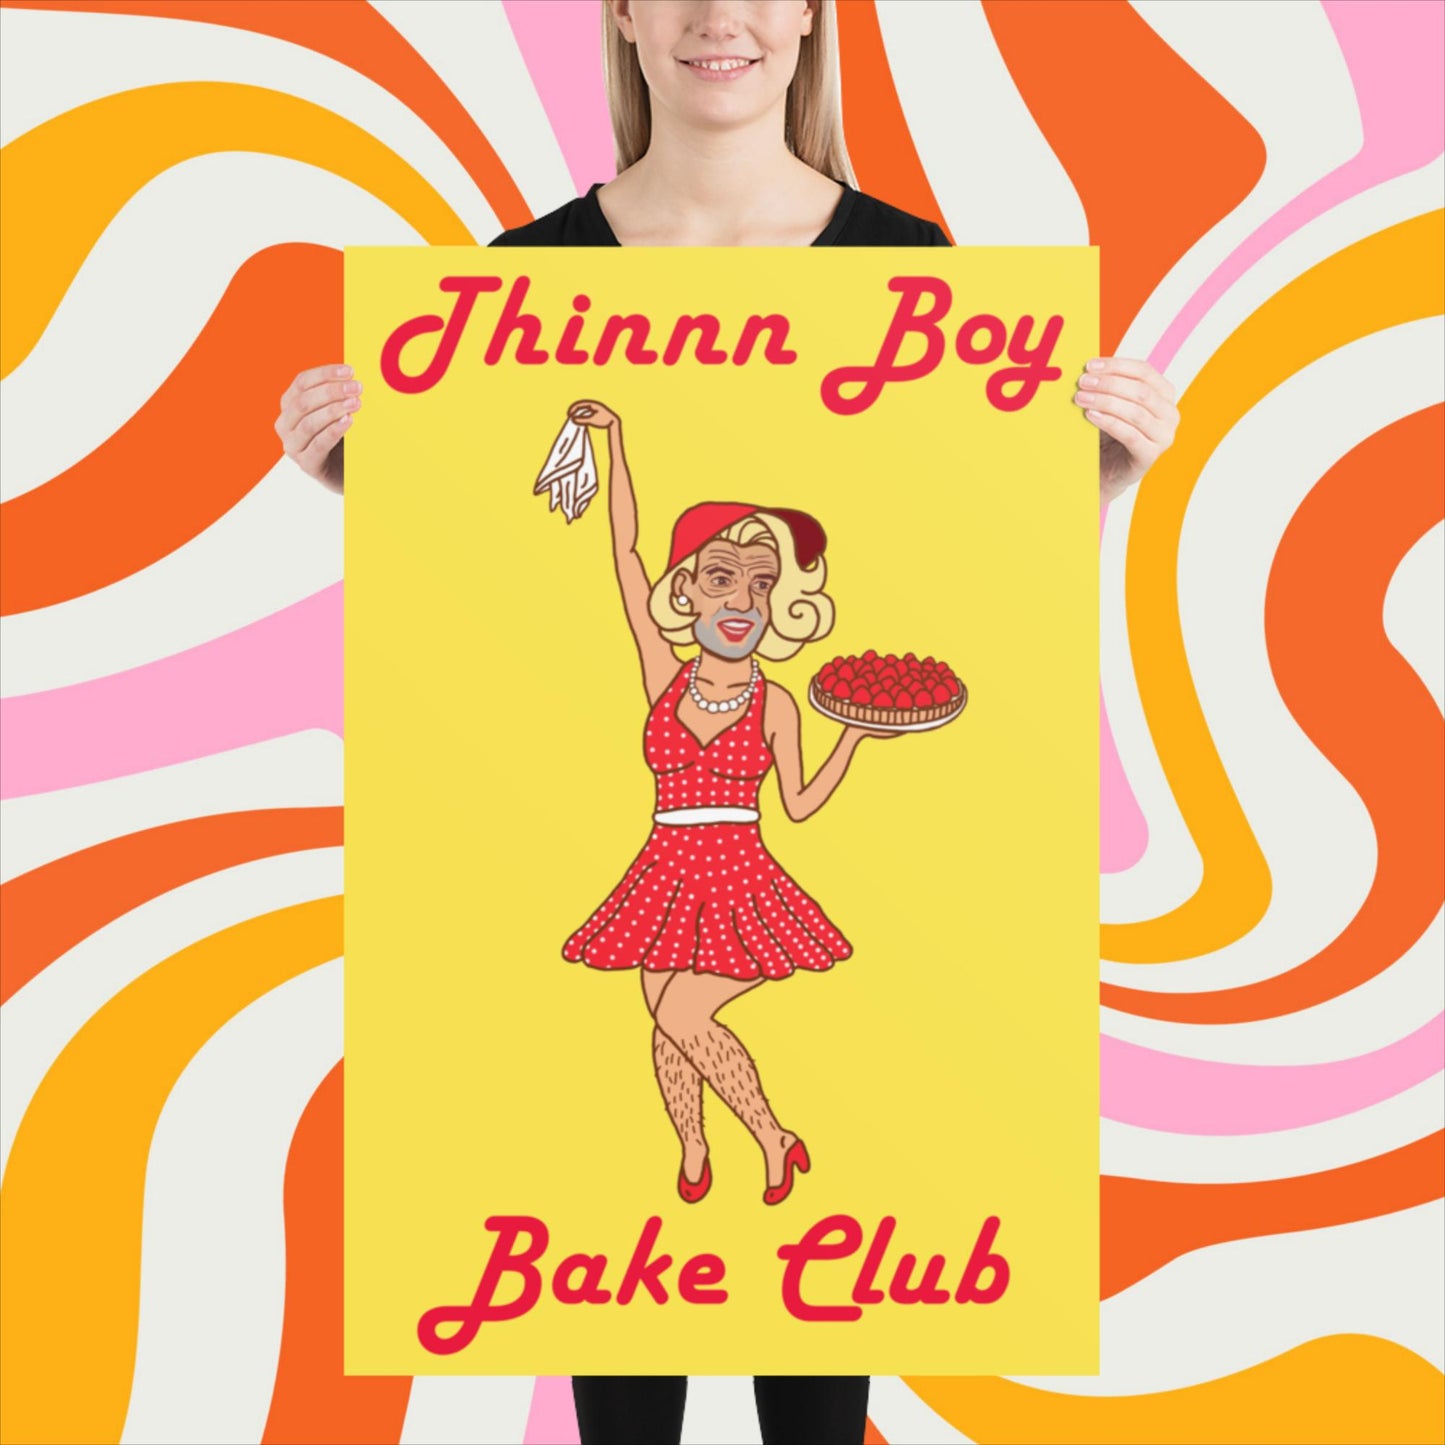 Thinnn Boy Bake Club The Fighter and The Kid TFATK Podcast Comedy 60s retro housewife Bryan Callen Poster Next Cult Brand